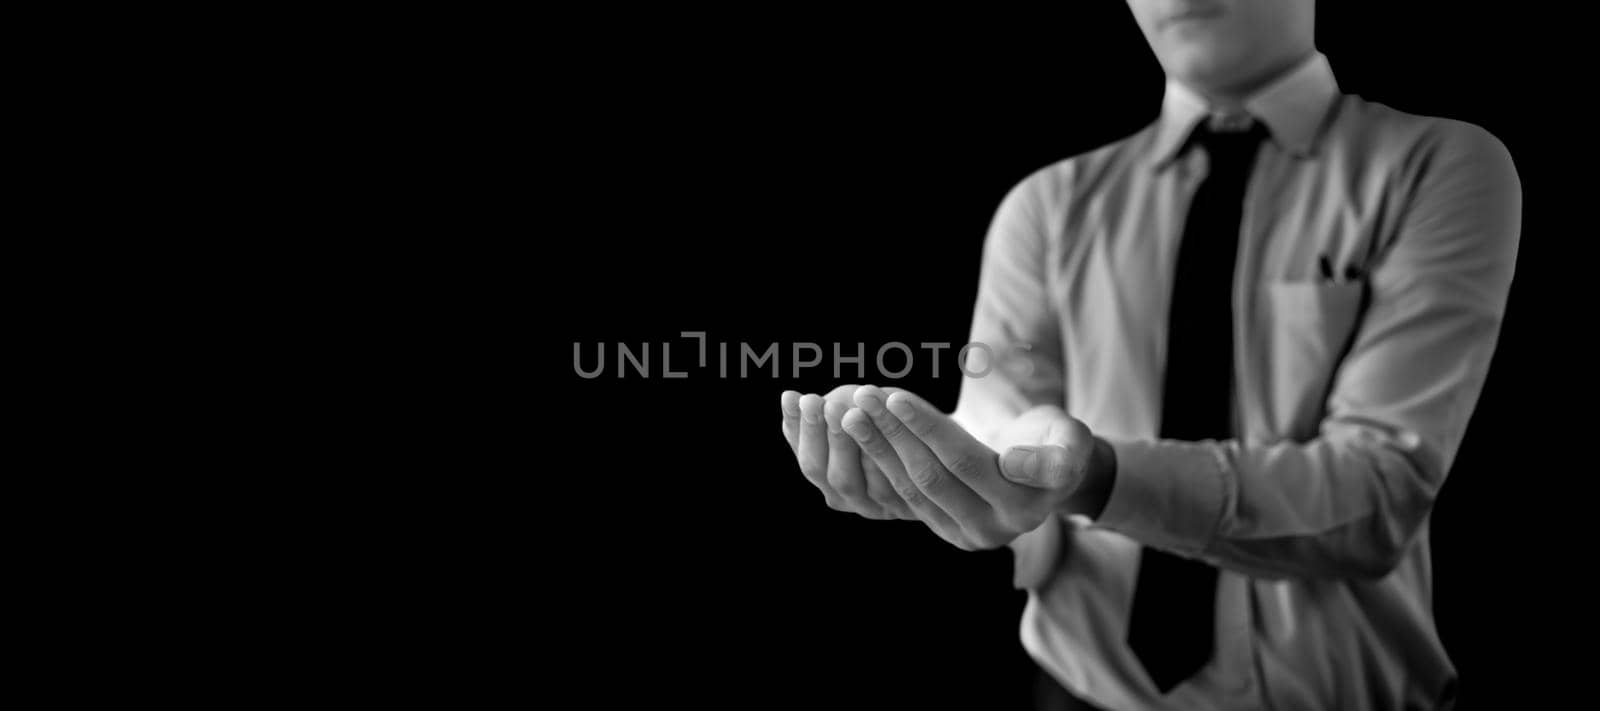 Shot of a unrecognizable man wearing blue shirt black tie and hands in a shape containing something inside it isolated on black background.